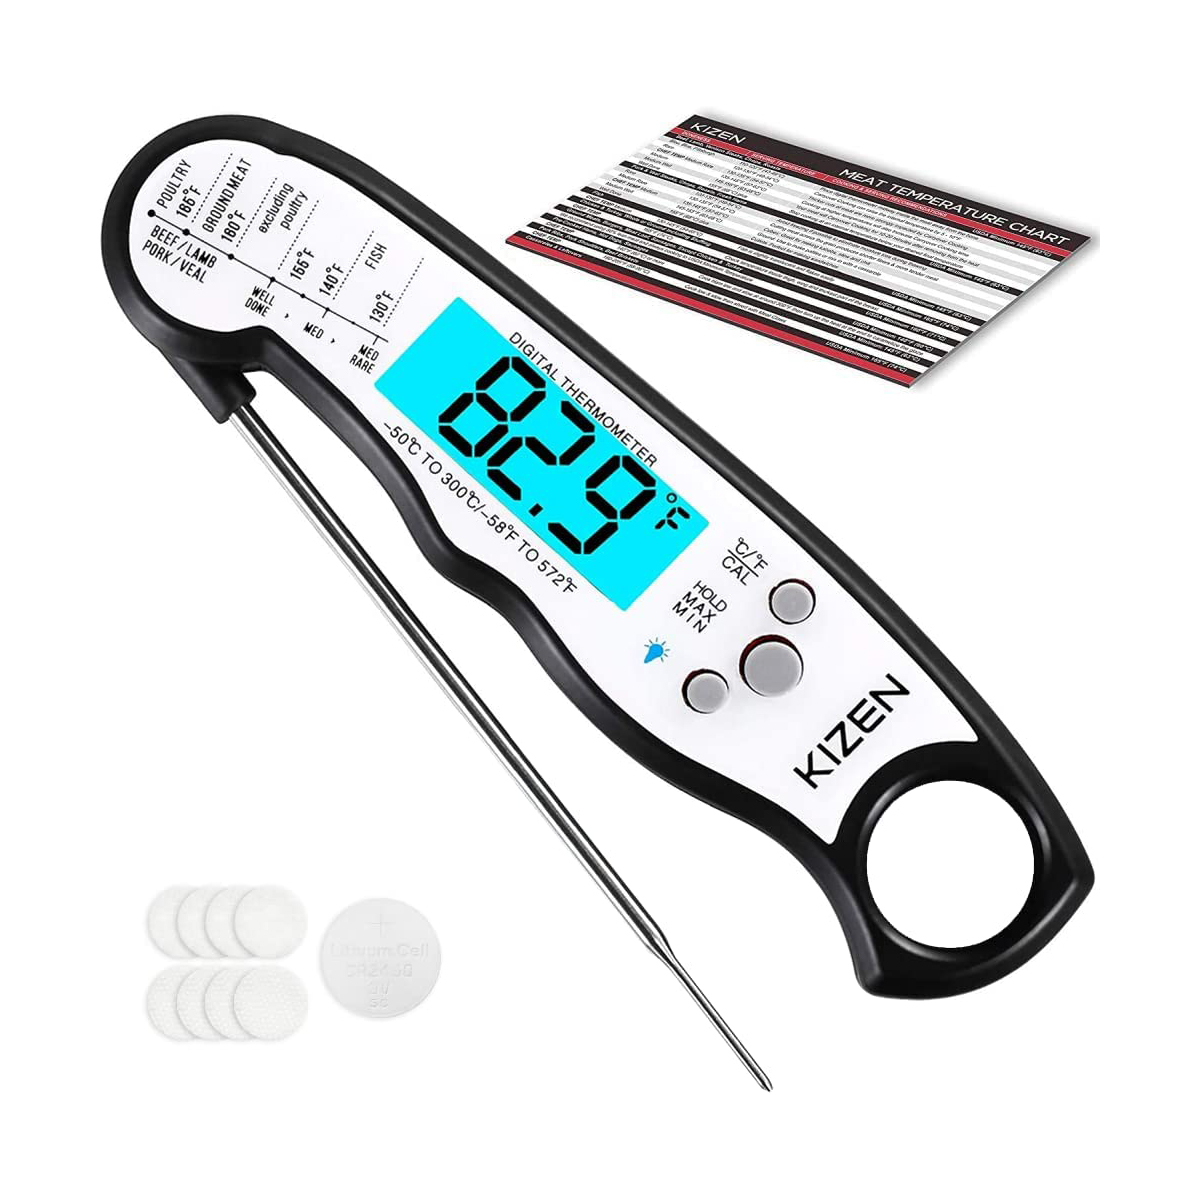 https://akns-images.eonline.com/eol_images/Entire_Site/2022928/rs_1200x1200-221028090416-1200-meat-thermometer.jpg?fit=around%7C1080:1080&output-quality=90&crop=1080:1080;center,top